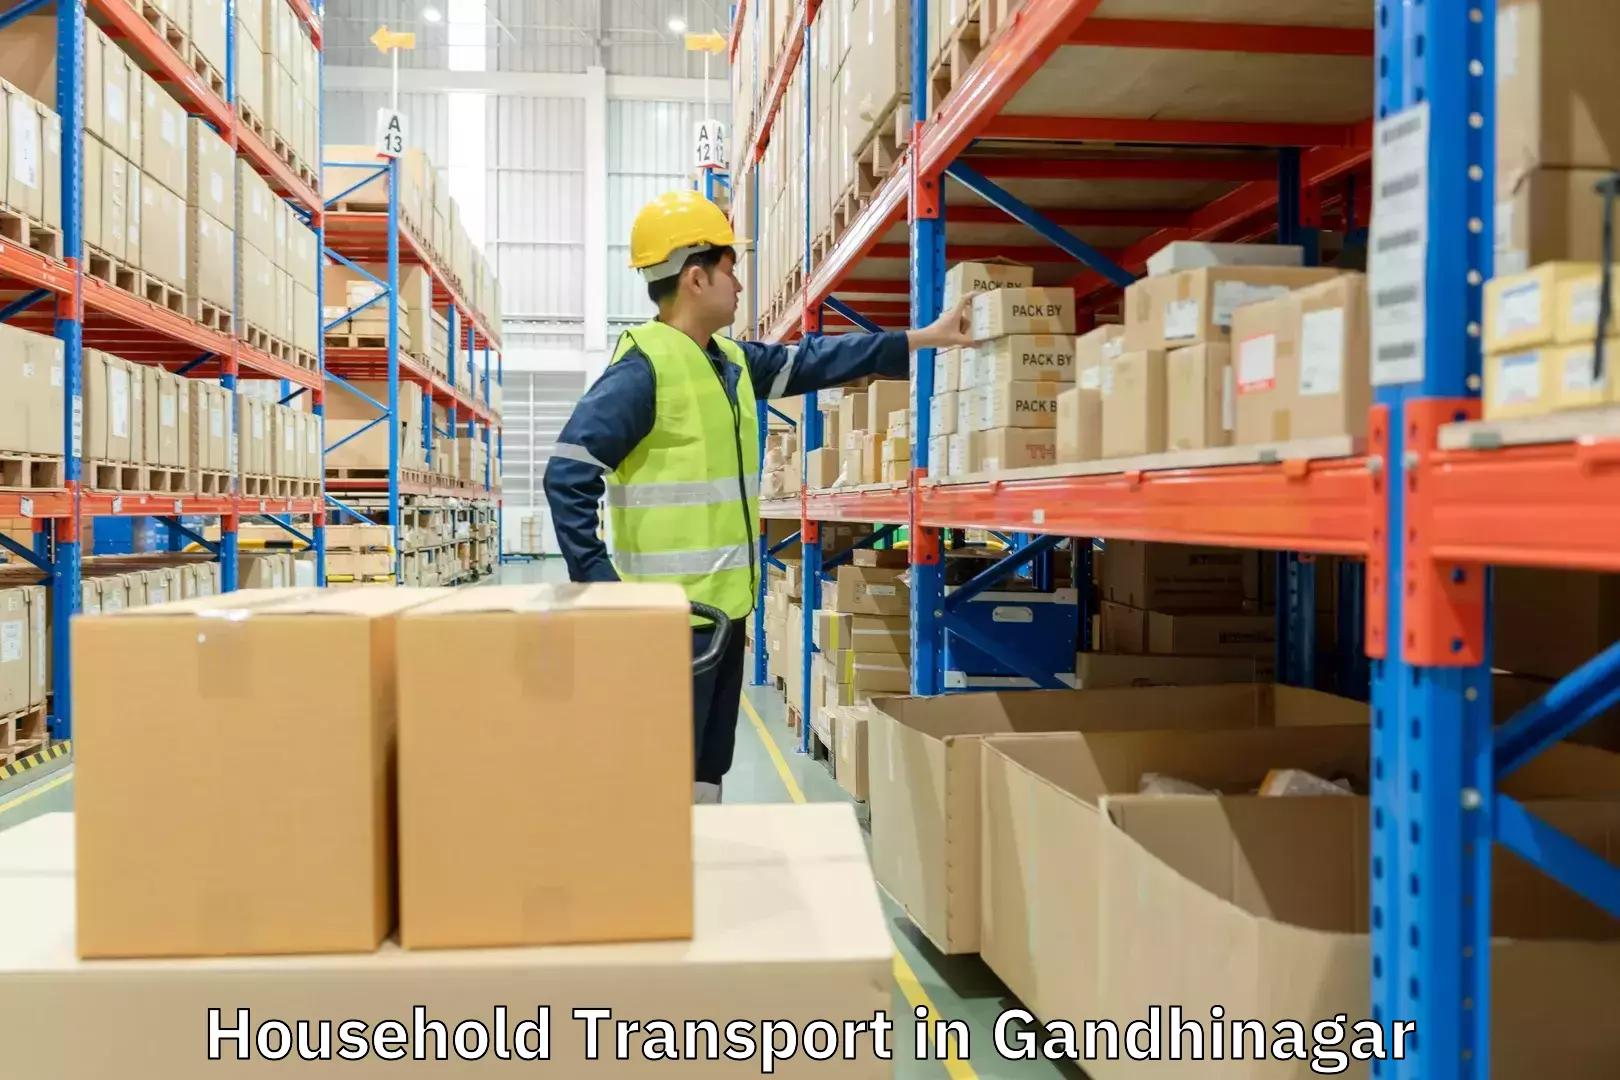 Moving and handling services in Gandhinagar